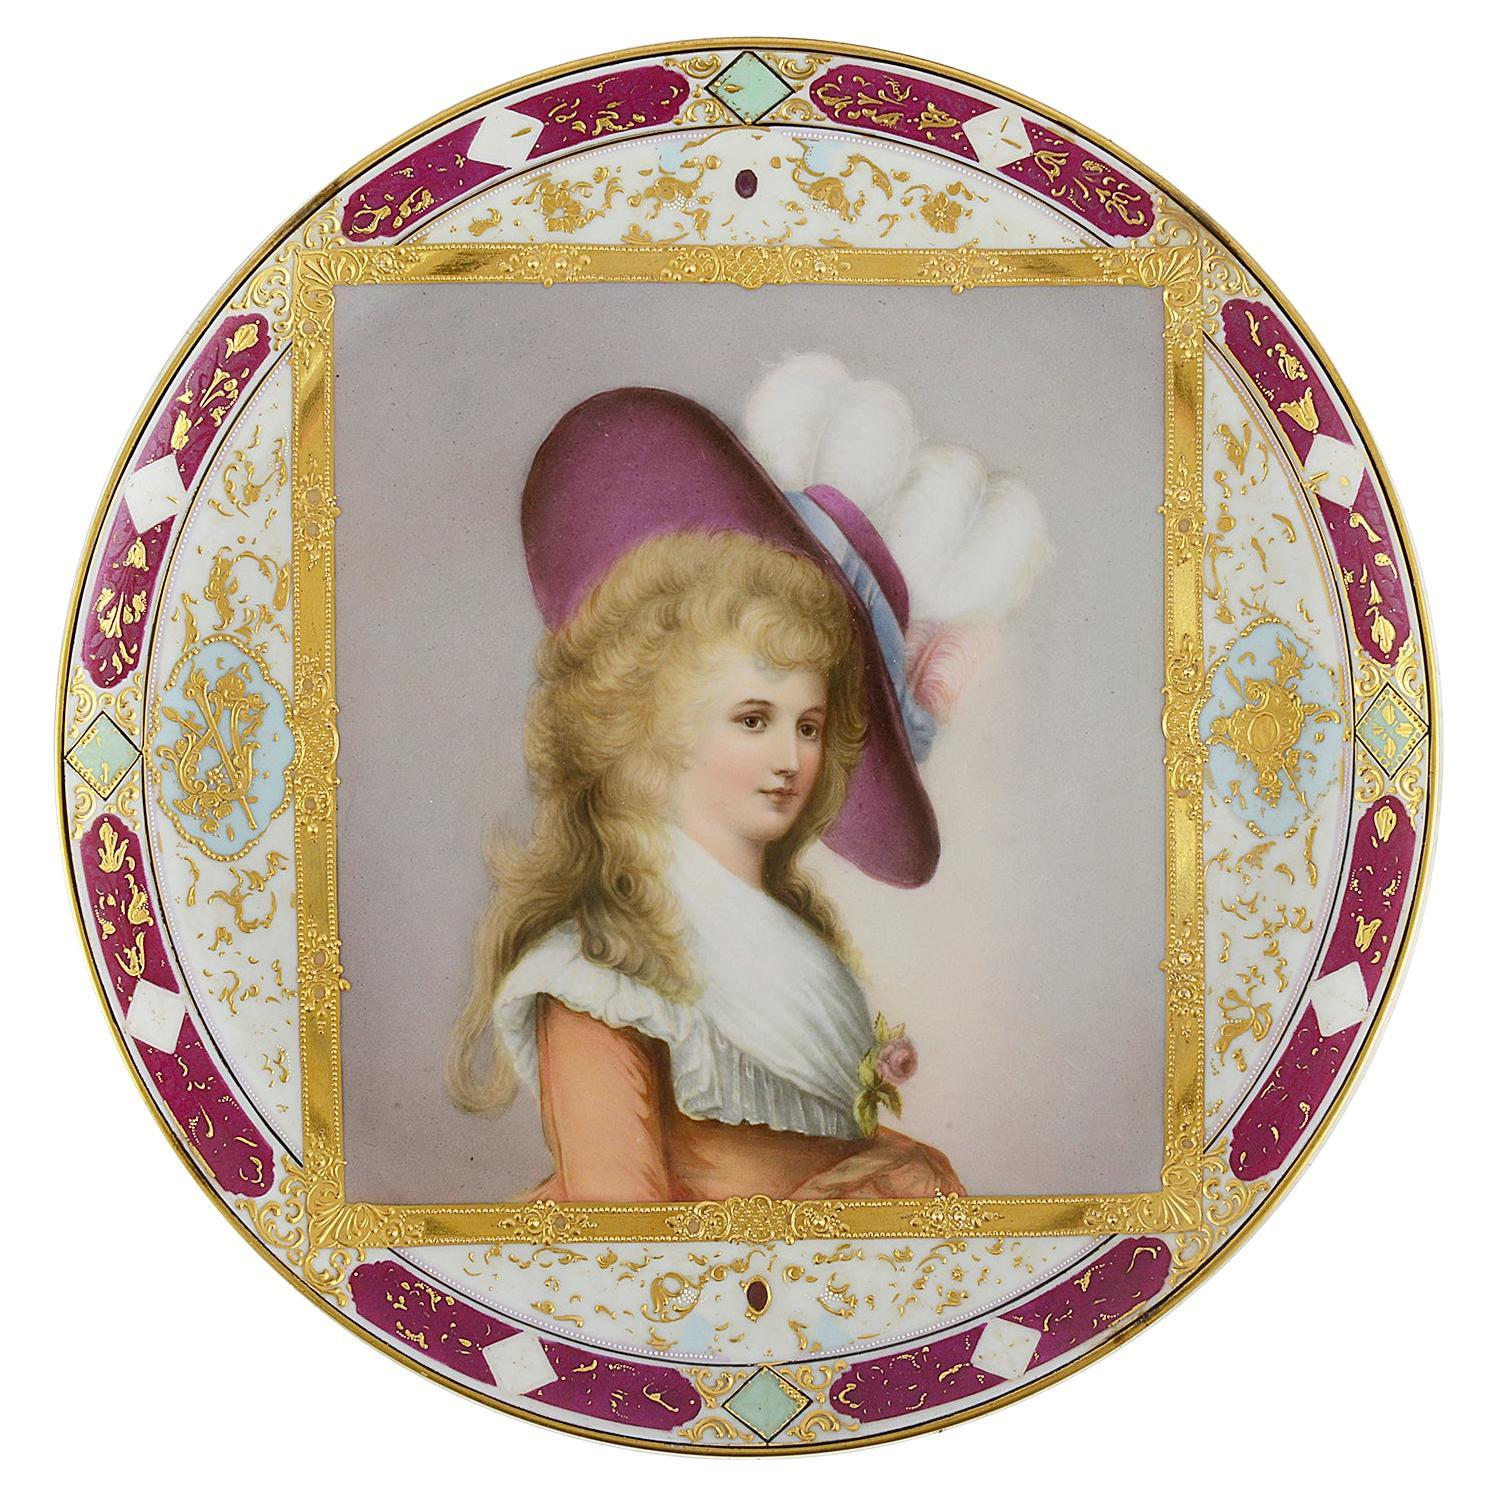 Late 19th Century Vienna Style Porcelain Plate, Depicting Duchess of Devonshire